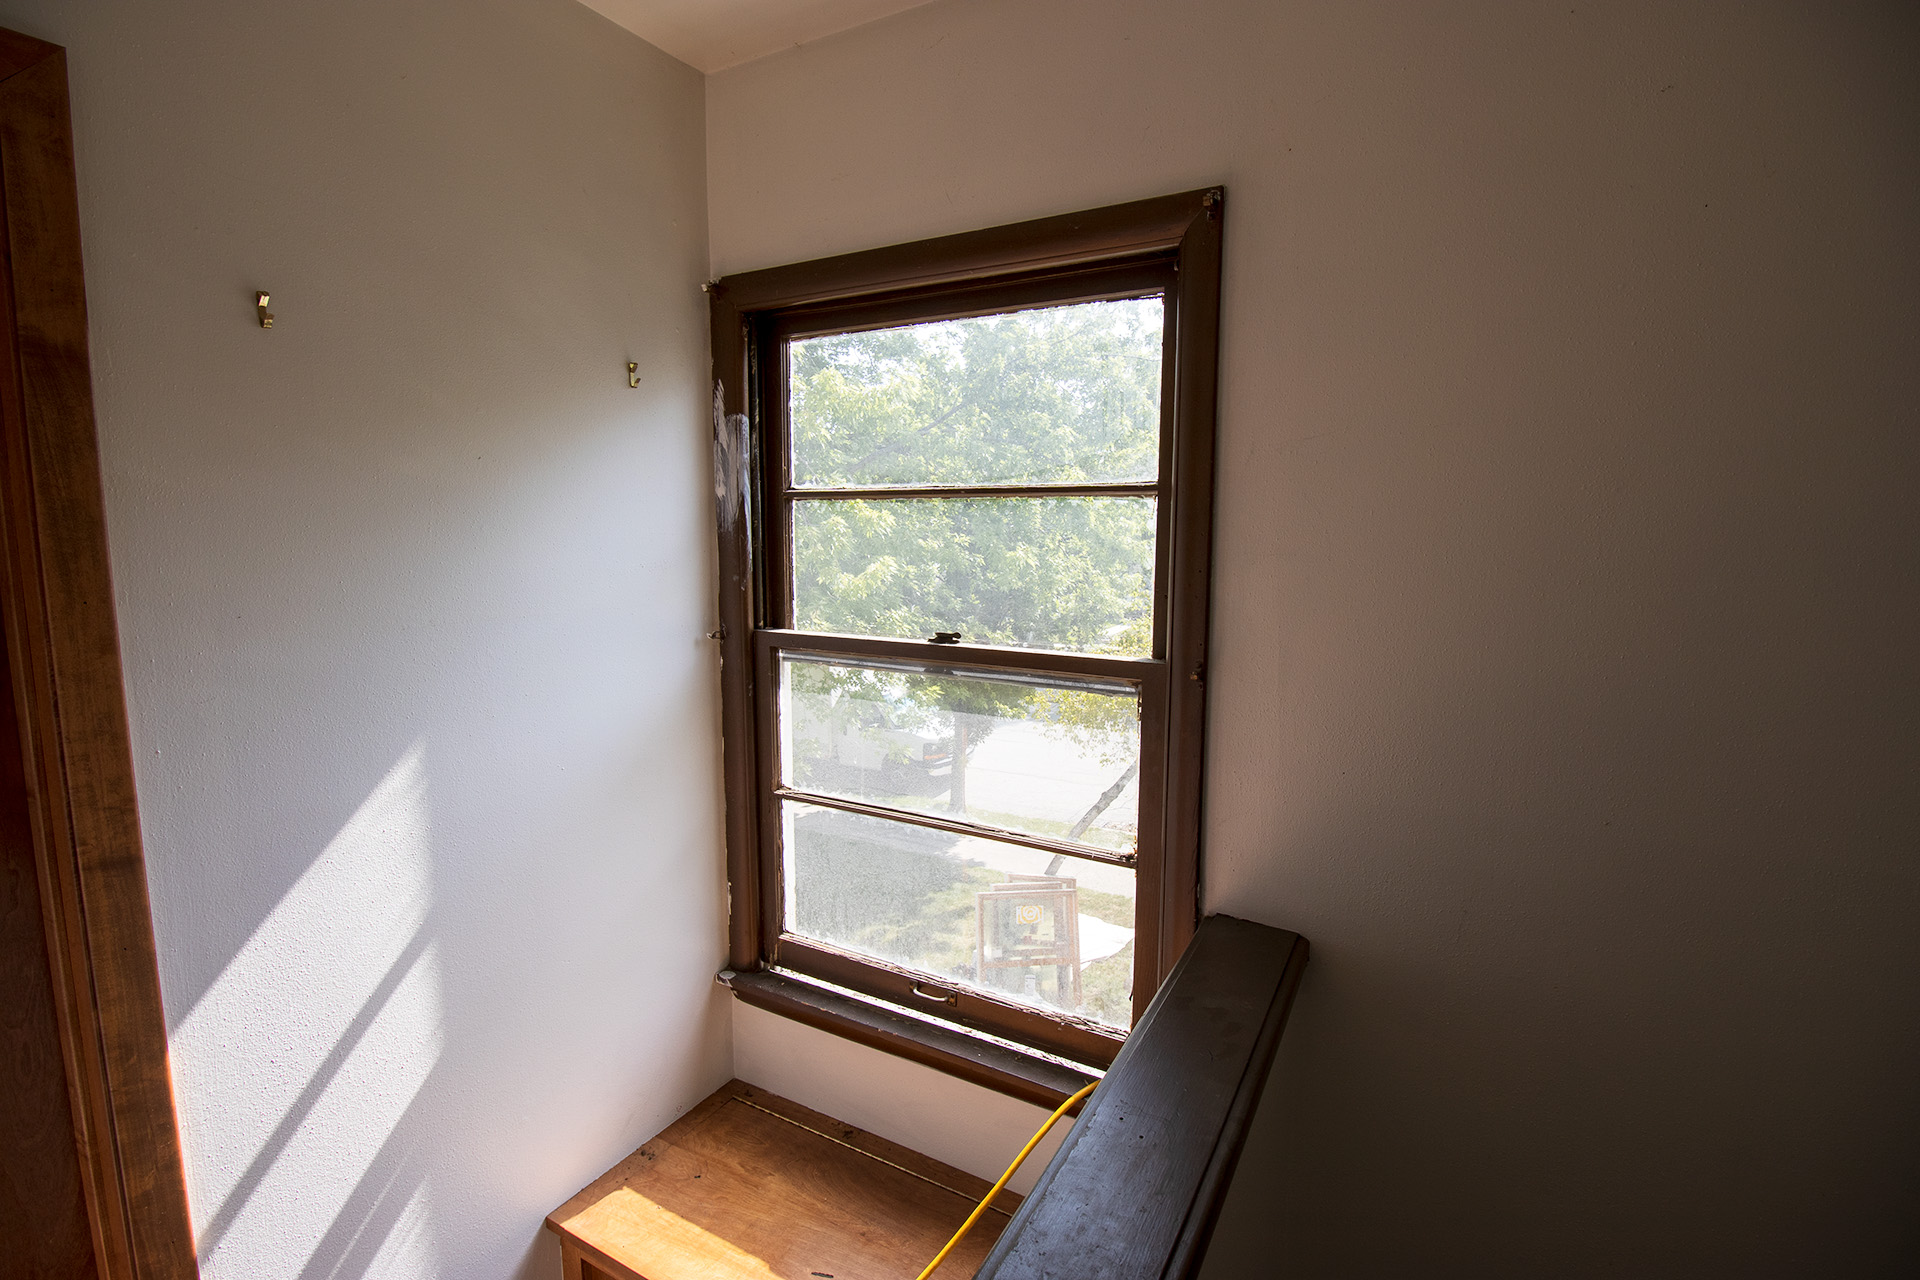 Double-Hung Window With Storm Window Pre-Installation